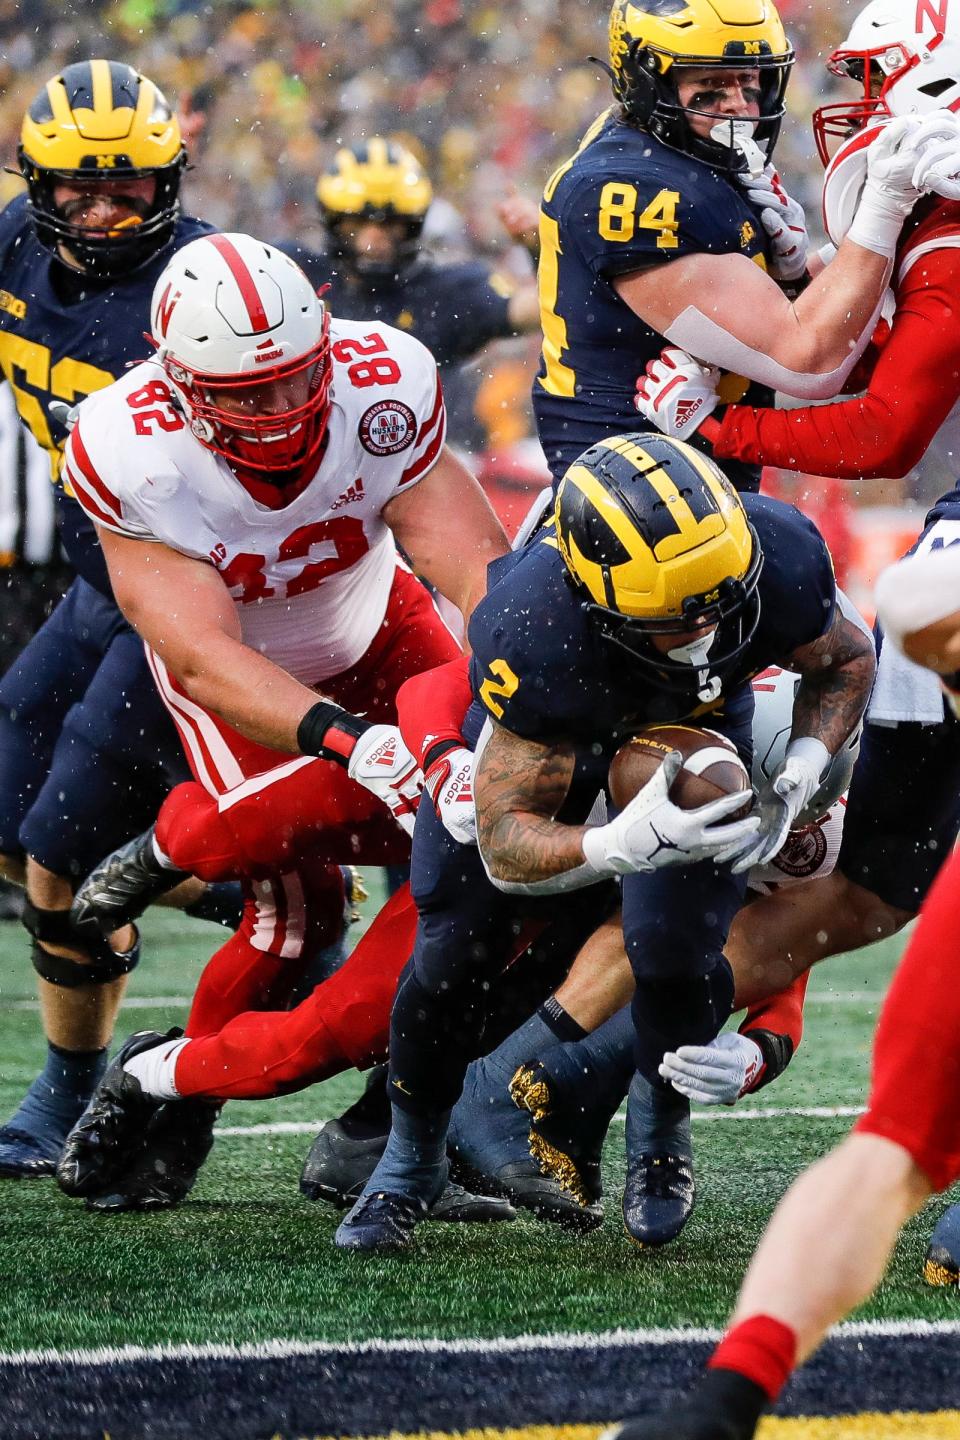 Michigan running back Blake Corum (2) rushes into the end zone for a touchdown against Nebraska during the first half at Michigan Stadium in Ann Arbor on Saturday, Nov. 12, 2022.